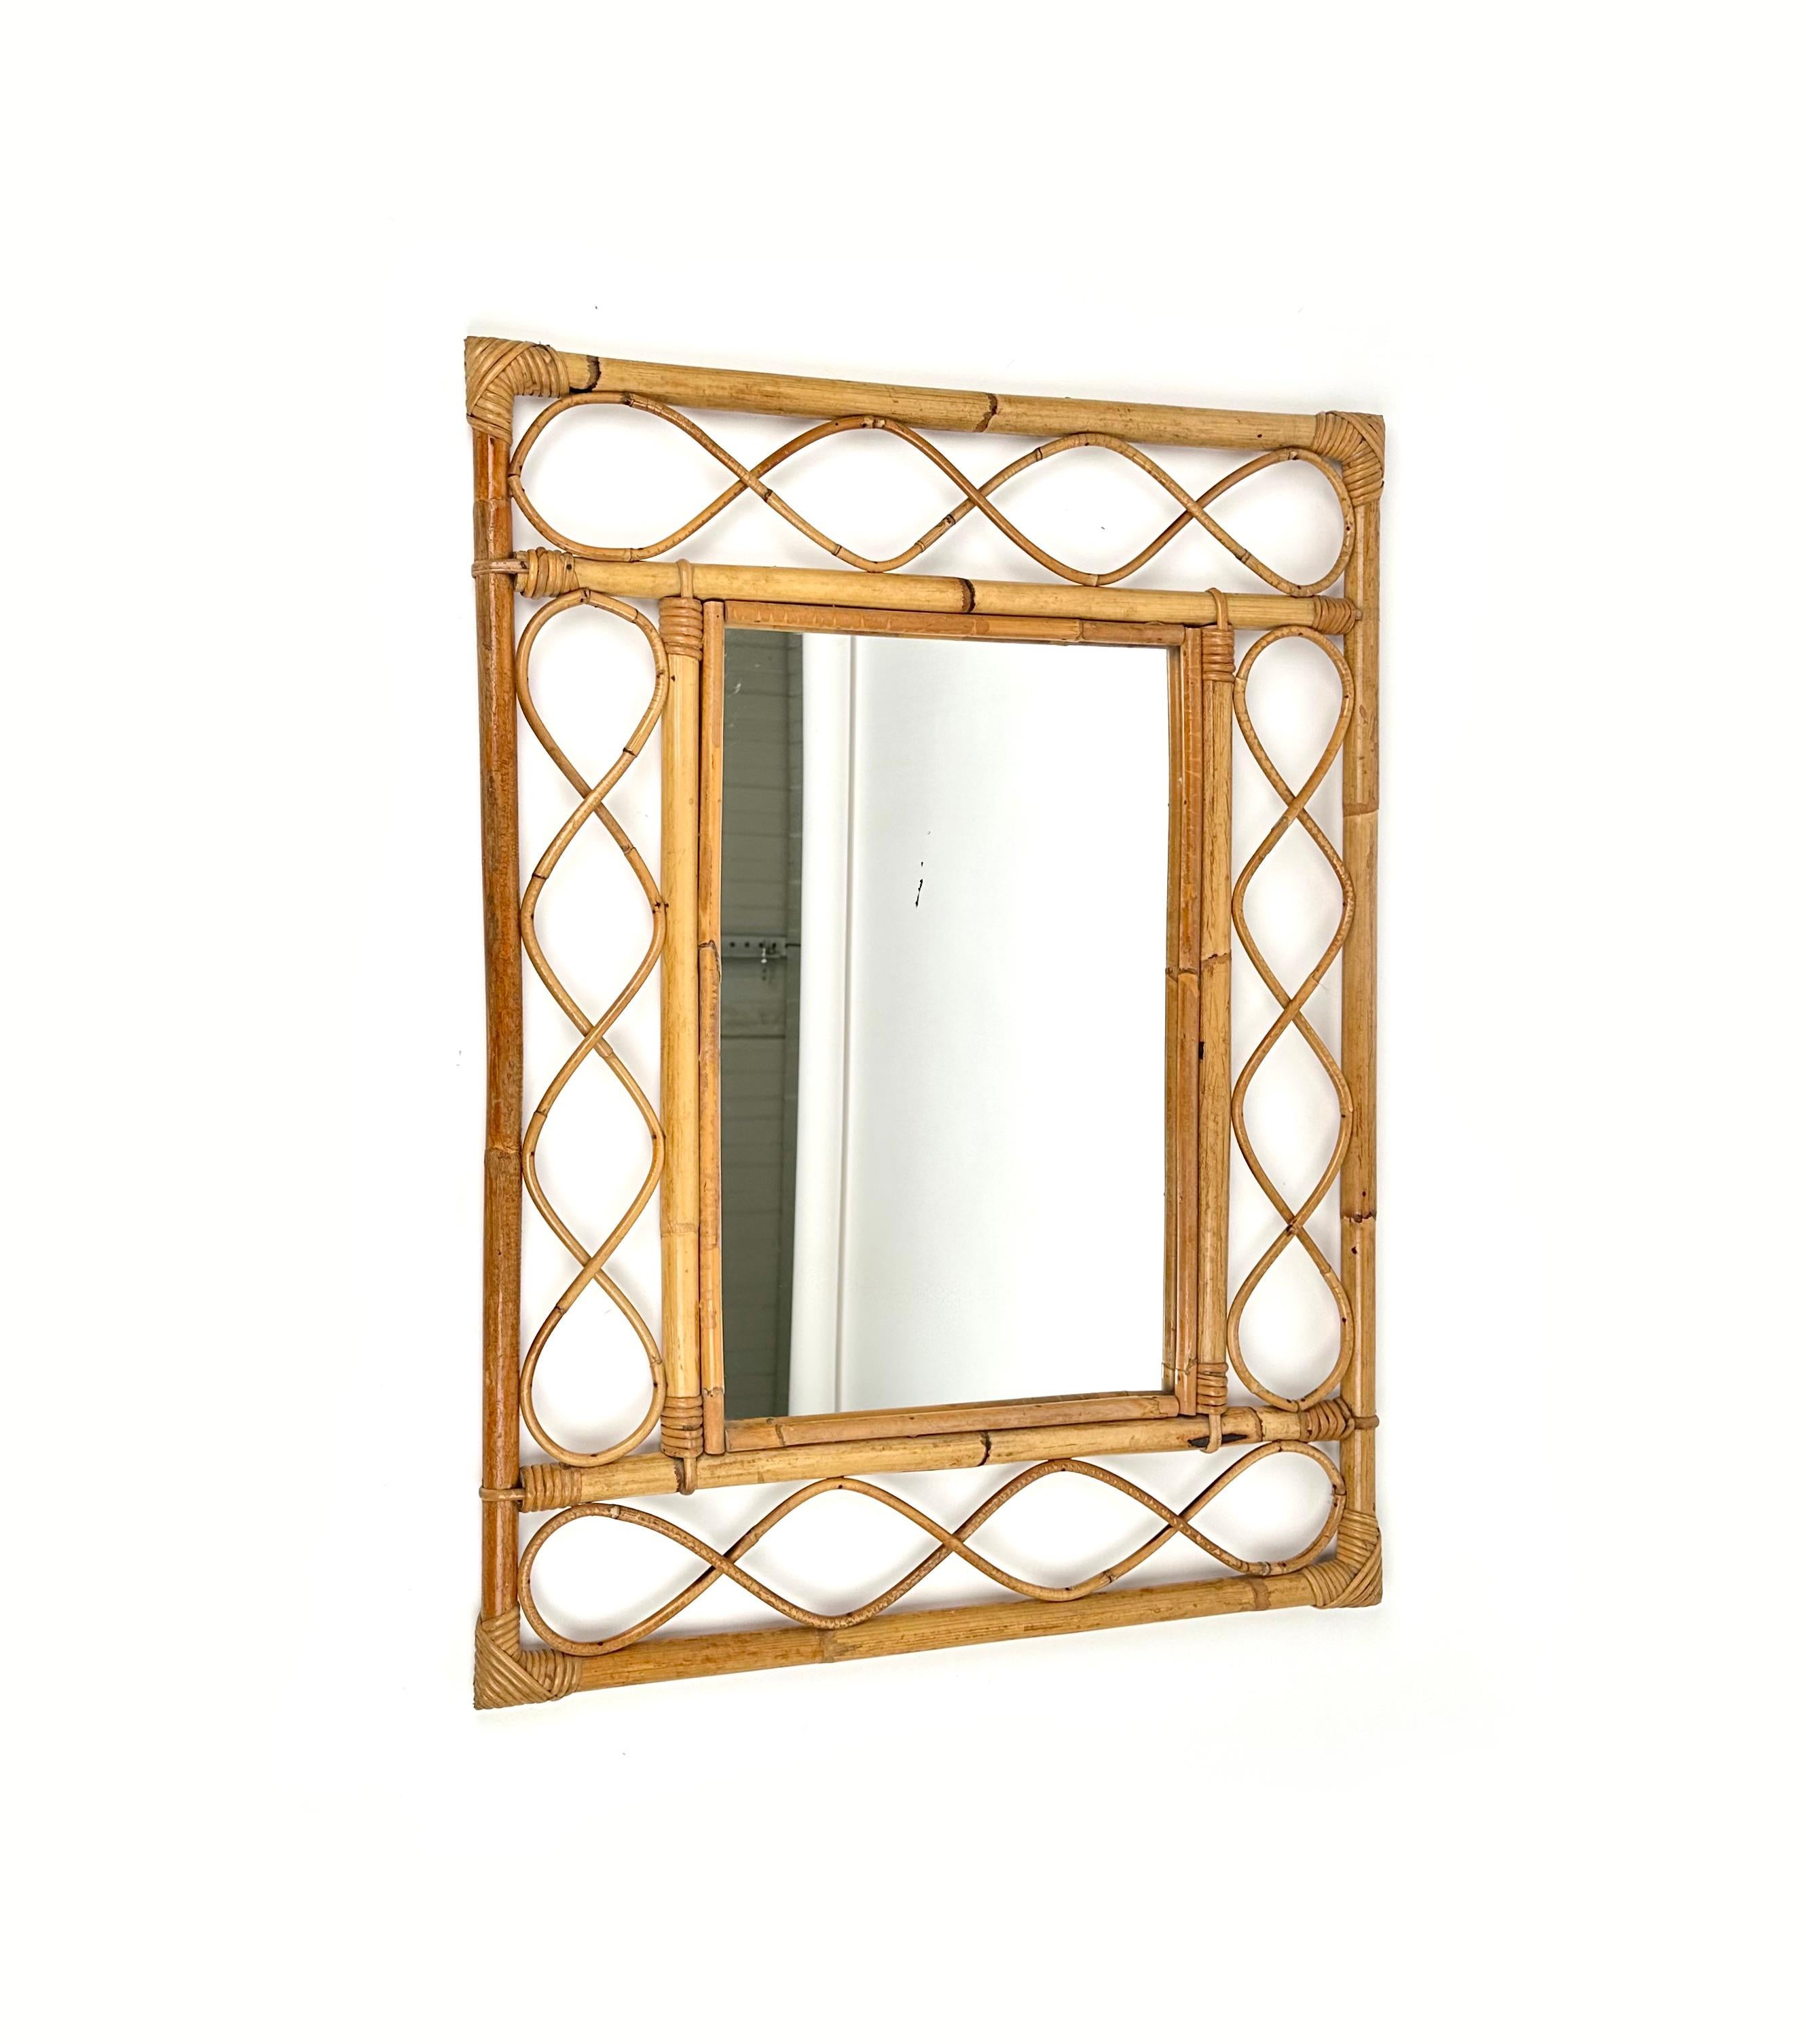 Mid-20th Century Midcentury Rectangular Wall Mirror in Bamboo and Rattan, Italy 1960s